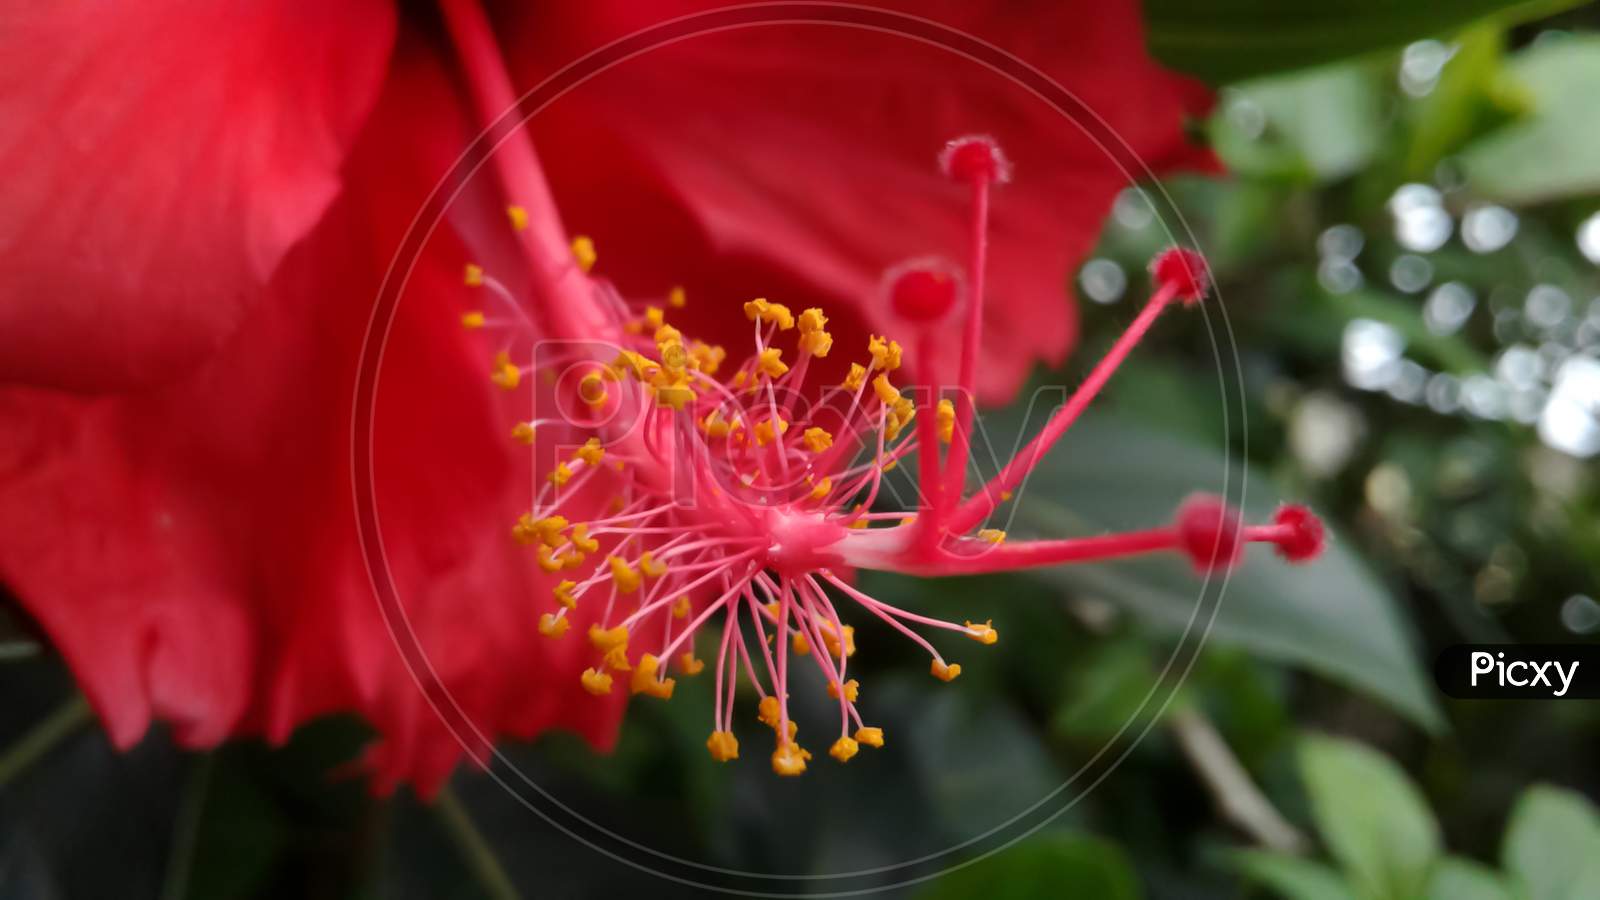 Macro Close-Up View Of Red Hibiscus Style Red Stamen Filament Anther And Yellow Pollen Grains. Hibiscus Rosa-Sinensis Flower